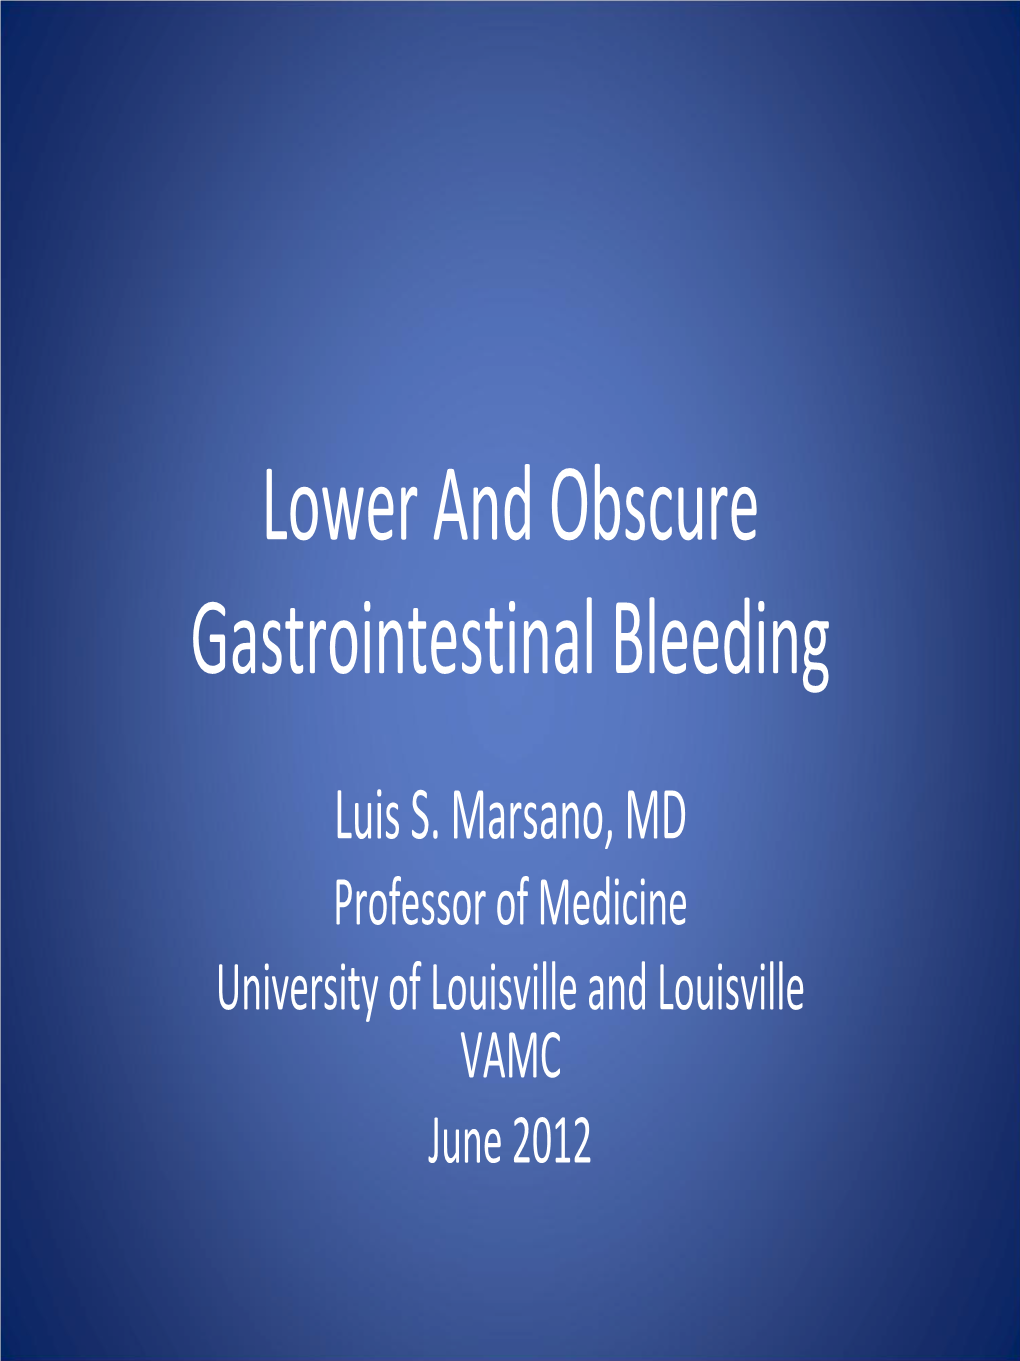 Lower and Obscure Gastrointestinal Bleeding